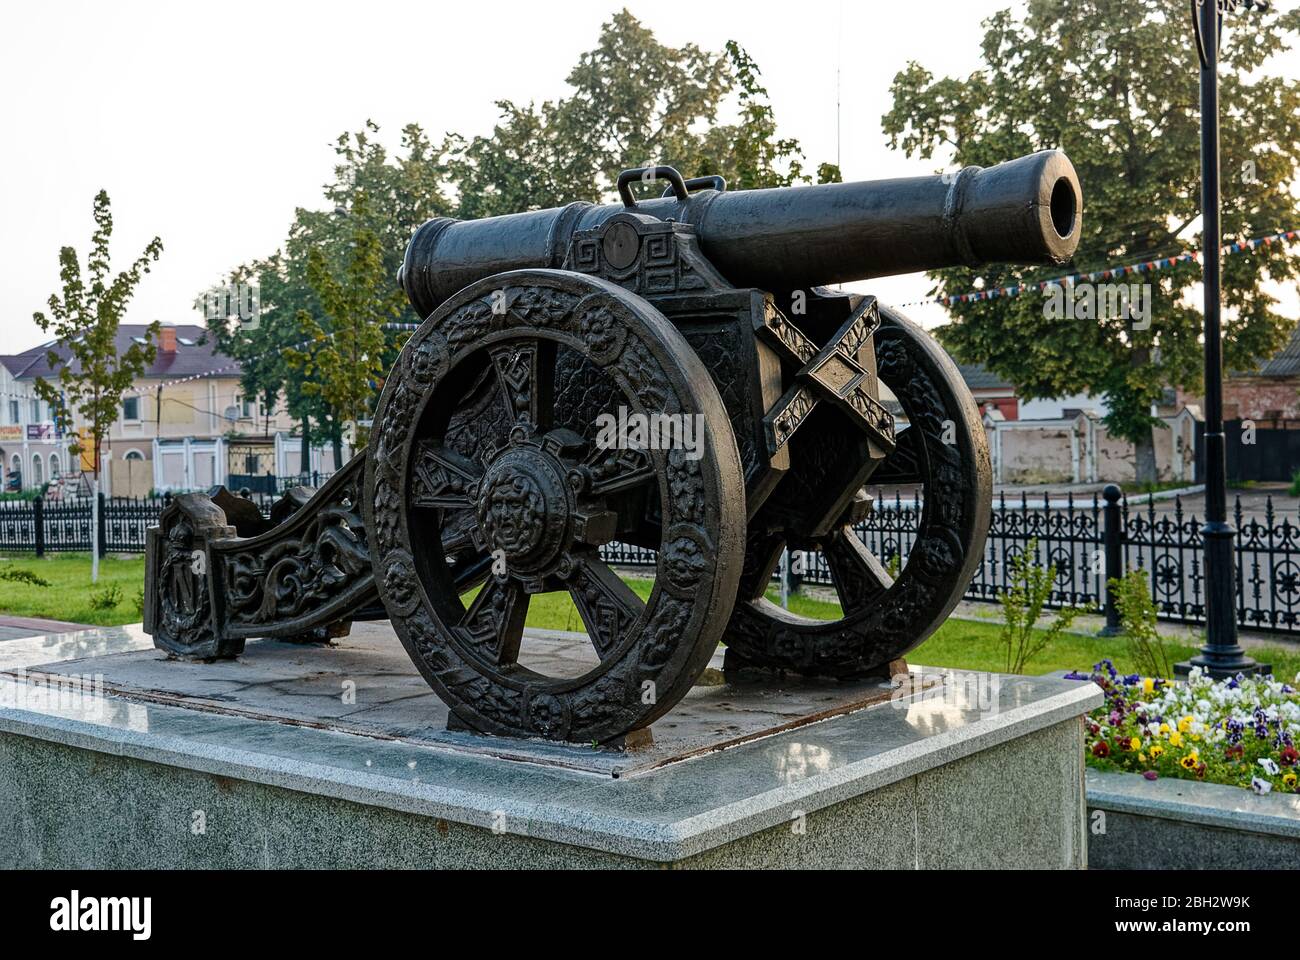 Kaluga Region, the city of Maloyaroslavets, Russia June 25, 2013: Monument gun in honor of the victory over Napoleon. Central square of the city. Stock Photo